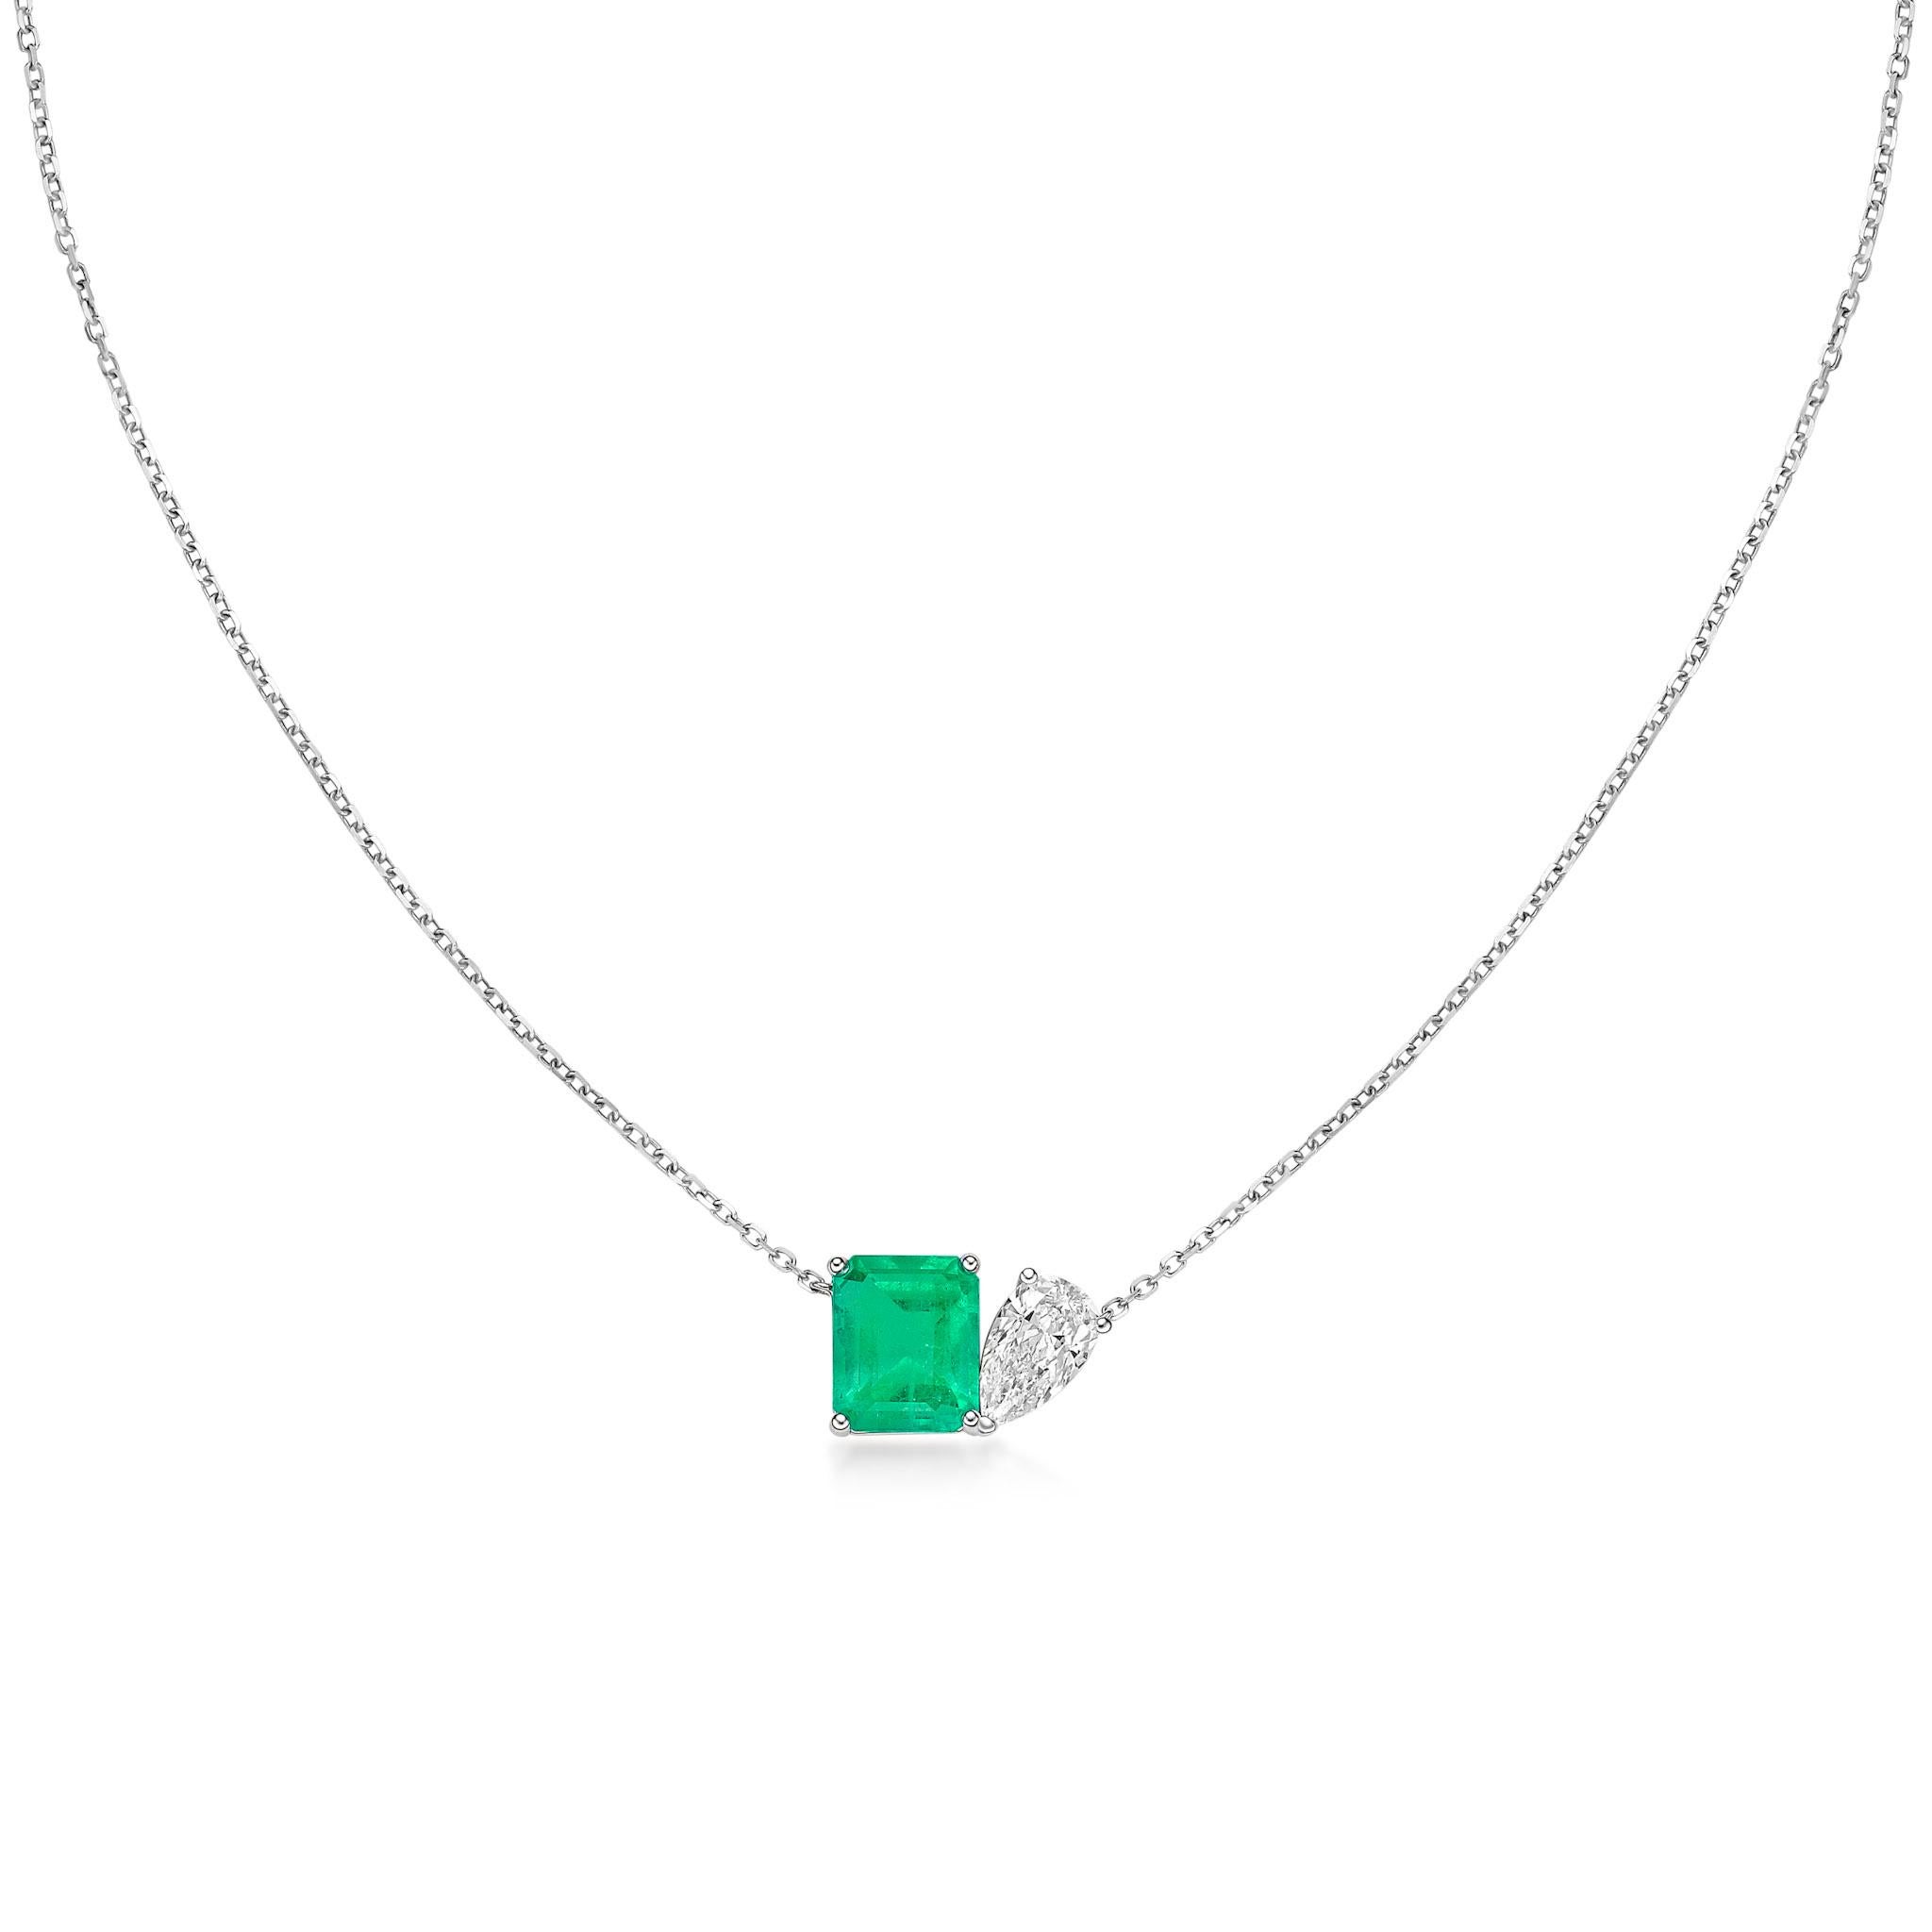 Stunning modern Toi et Moi necklace with a Colourless Pear Shape Diamond and a luscious Emerald. The contrast of two stones and the casual modern setting makes this necklace wearable day to night. 

This unique piece is custom made and as a minimum